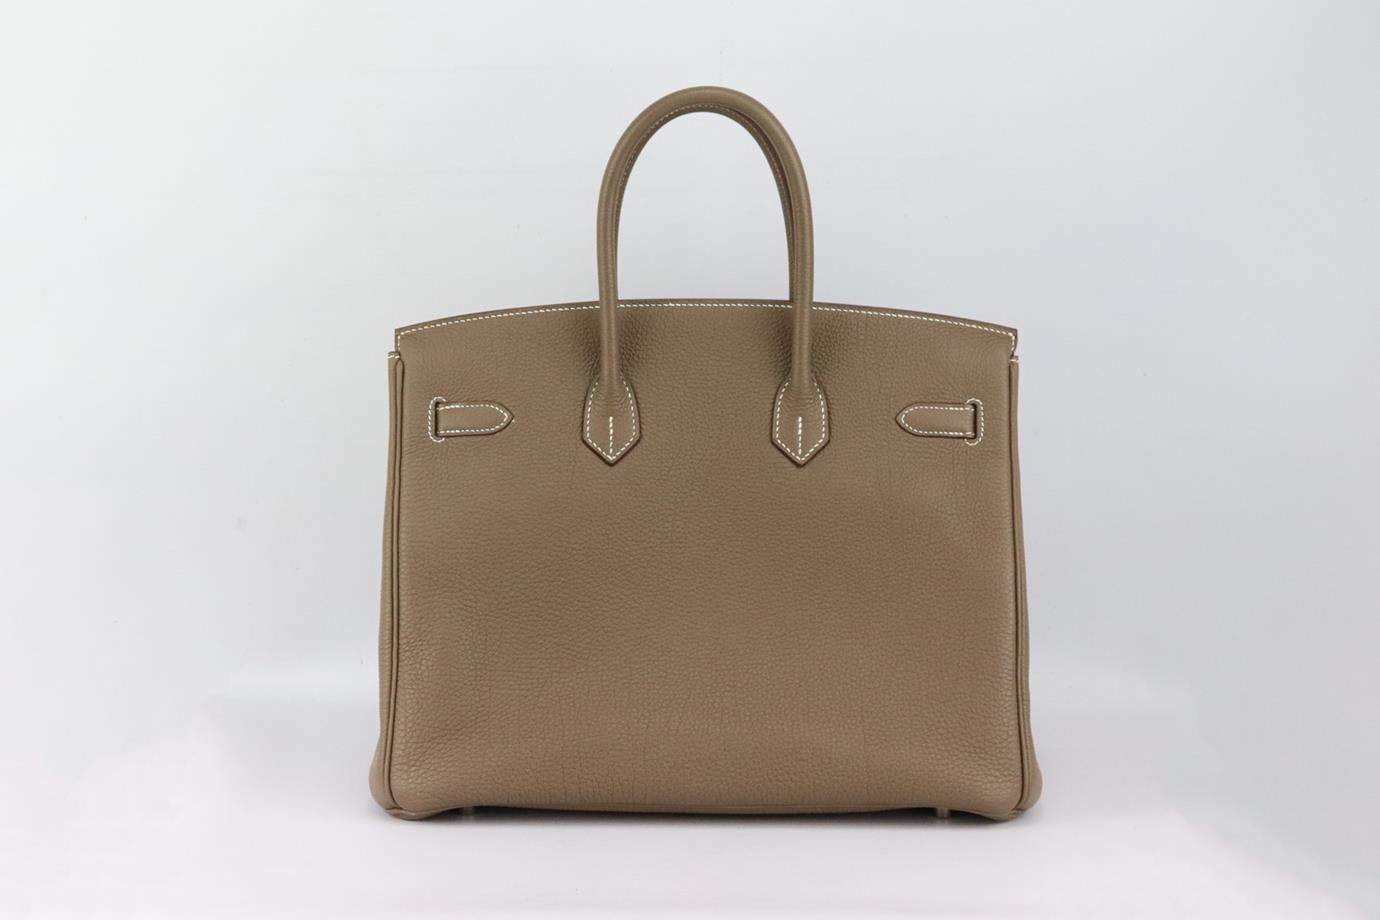 <ul>
<li>Hermès 2011 Birkin 35cm Togo leather bag.</li>
<li>Made in France, this beautiful 2011 Hermès ‘Birkin’ 35cm handbag has been made from taupe ‘Togo’ leather exterior in ‘Etoupe’ with matching interior, this piece is decorated with silver